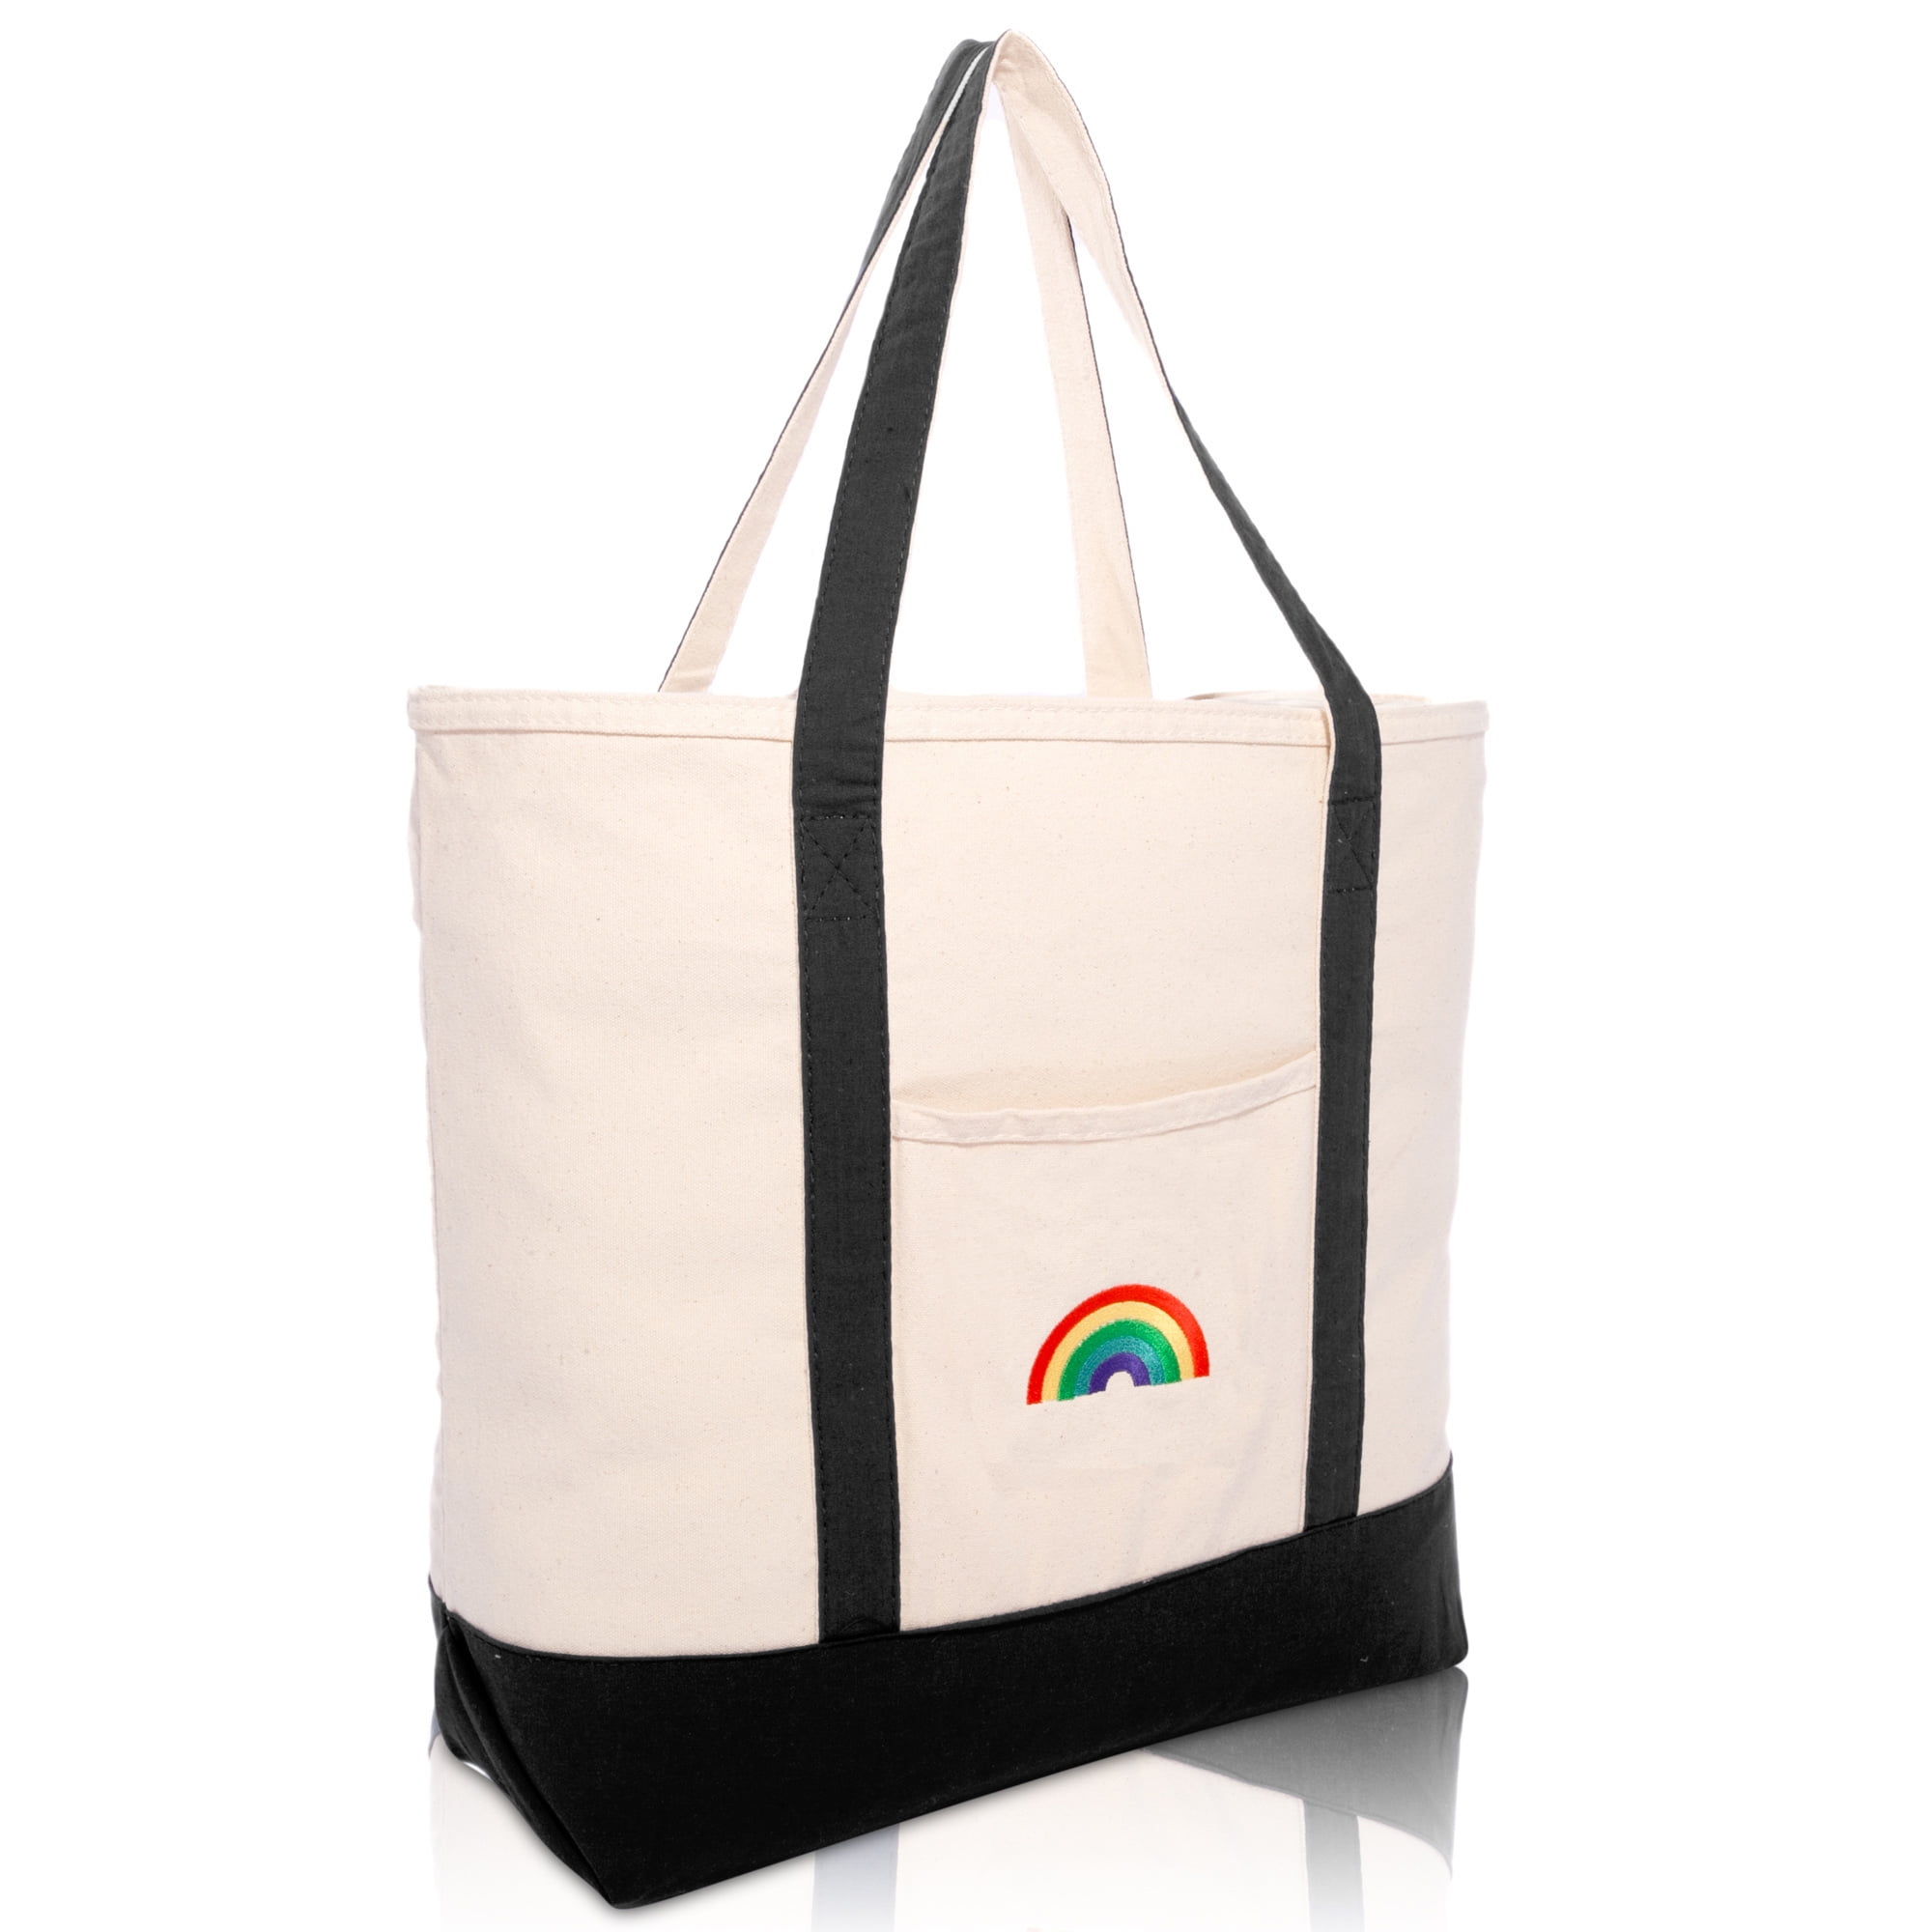 DALIX Rainbow Tote Bag with Zippered Top